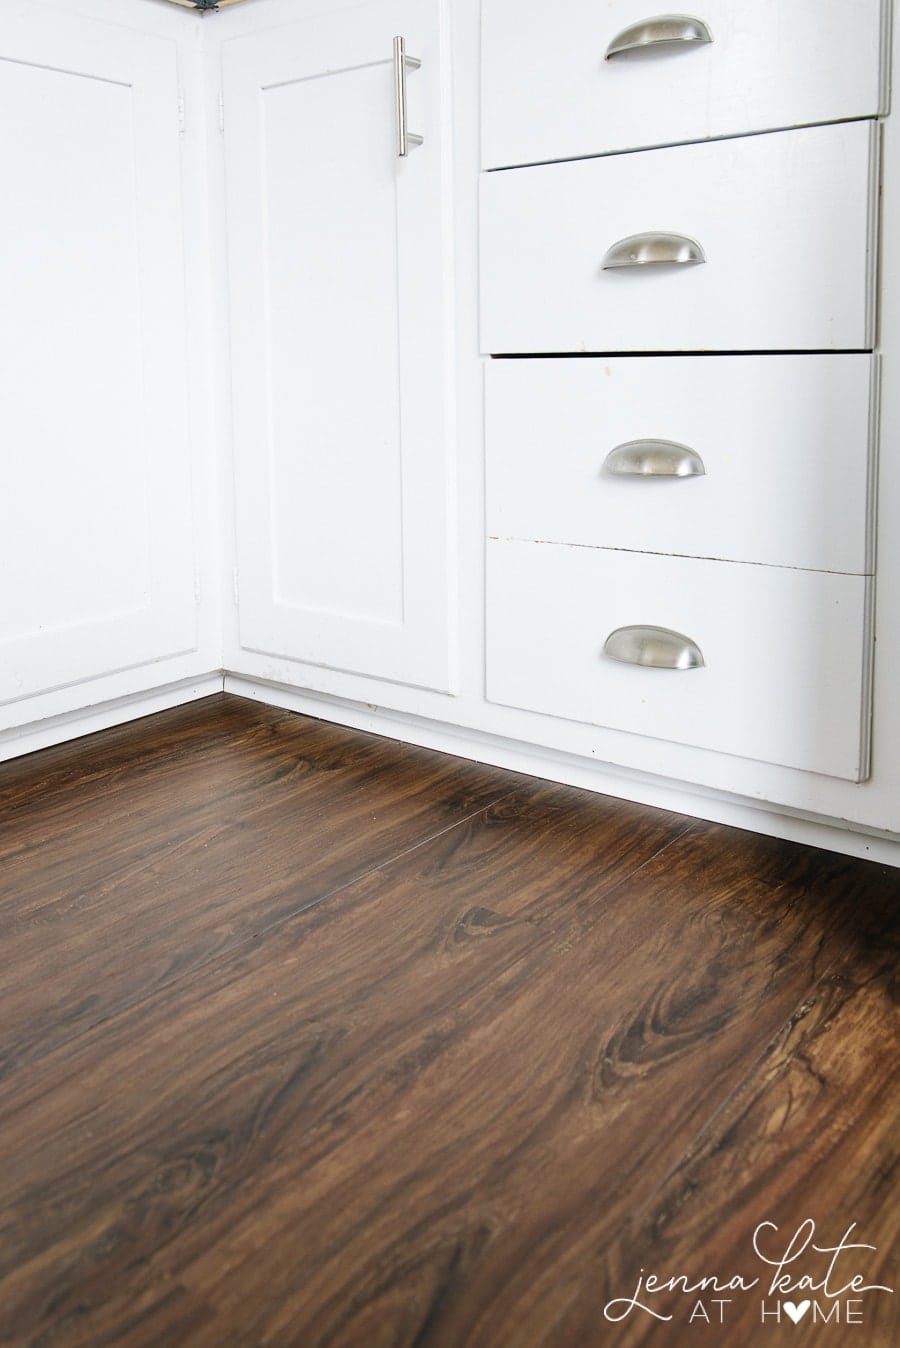 The edges of the luxury vinyl plank up against kitchen cabinets and secured with shoe molding